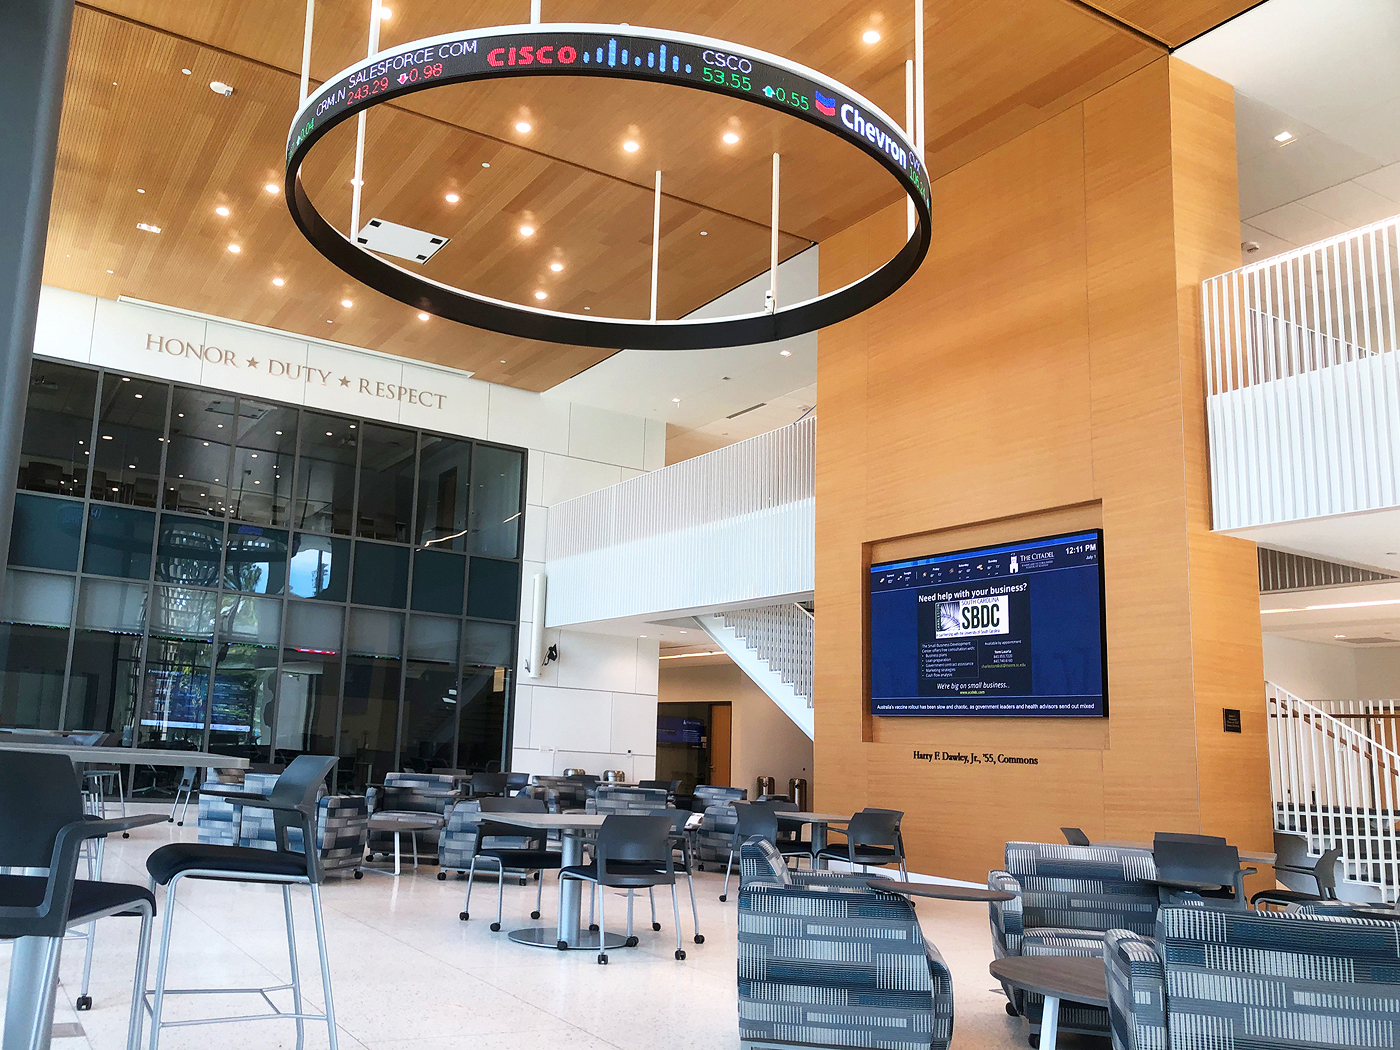 The public entrance to Bastin Hall is the Commons, a spacious venue where students gather to study, collaborate, meet, and attend group events. A circular stock ticker high above reflects the building's business focus. A videowall displays general interest messaging. The AV system includes a projector and screen that lower from the ceiling and a powerful sound system.